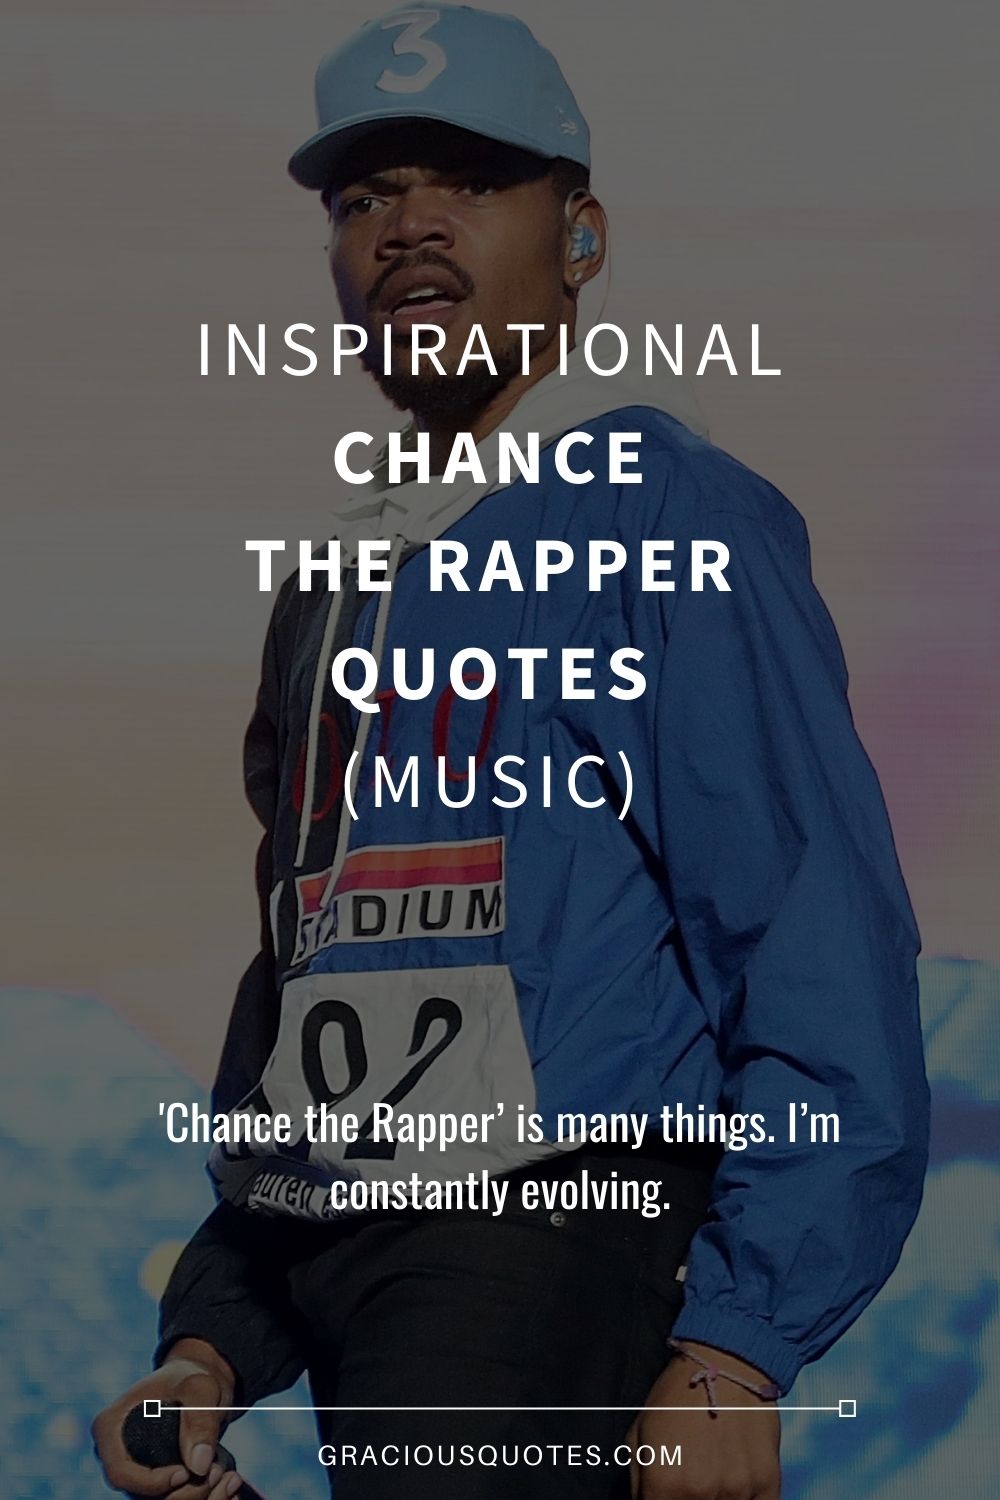 Inspirational Chance the Rapper Quotes (MUSIC) - Gracious Quotes